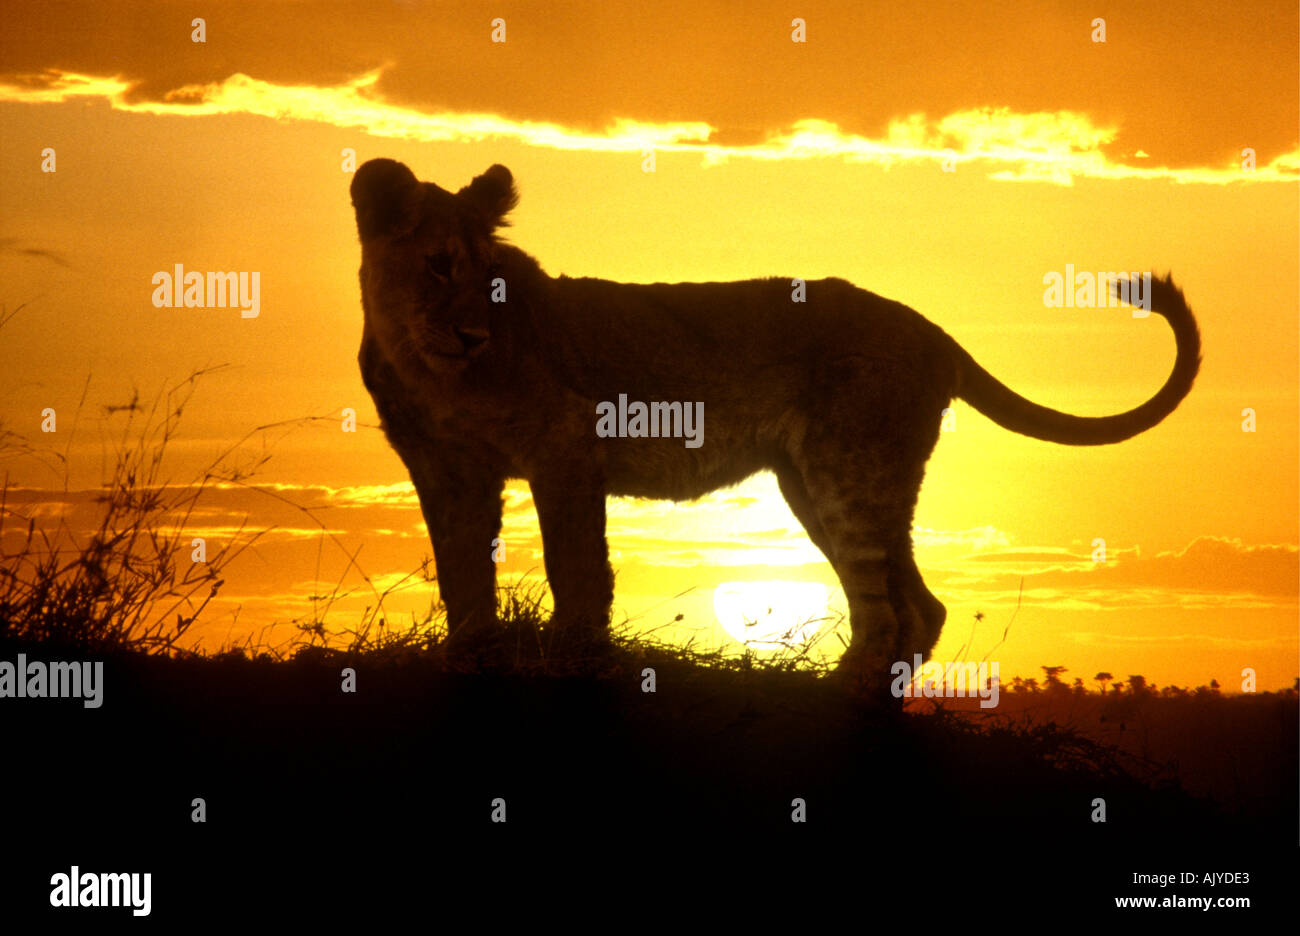 Young lion sihouetted against the sunset sky Masai Mara National Reserve Kenya East Africa Stock Photo